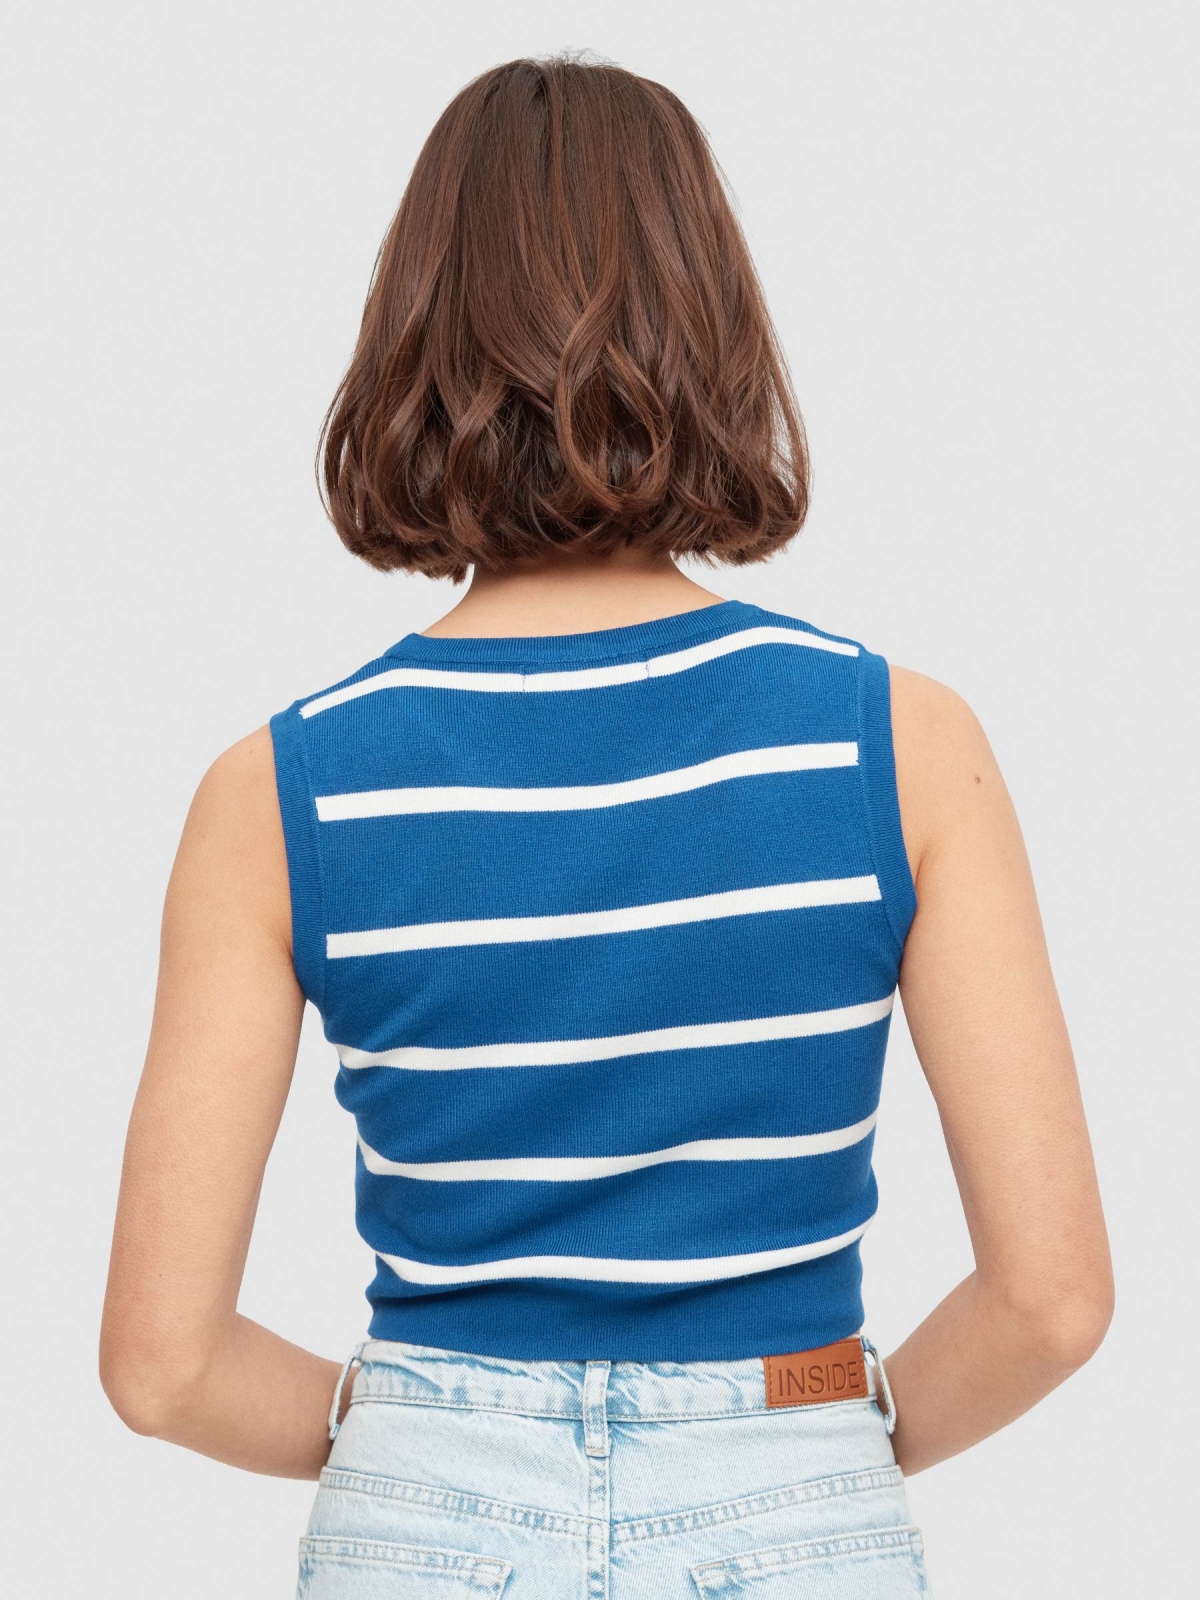 Striped top electric blue middle back view